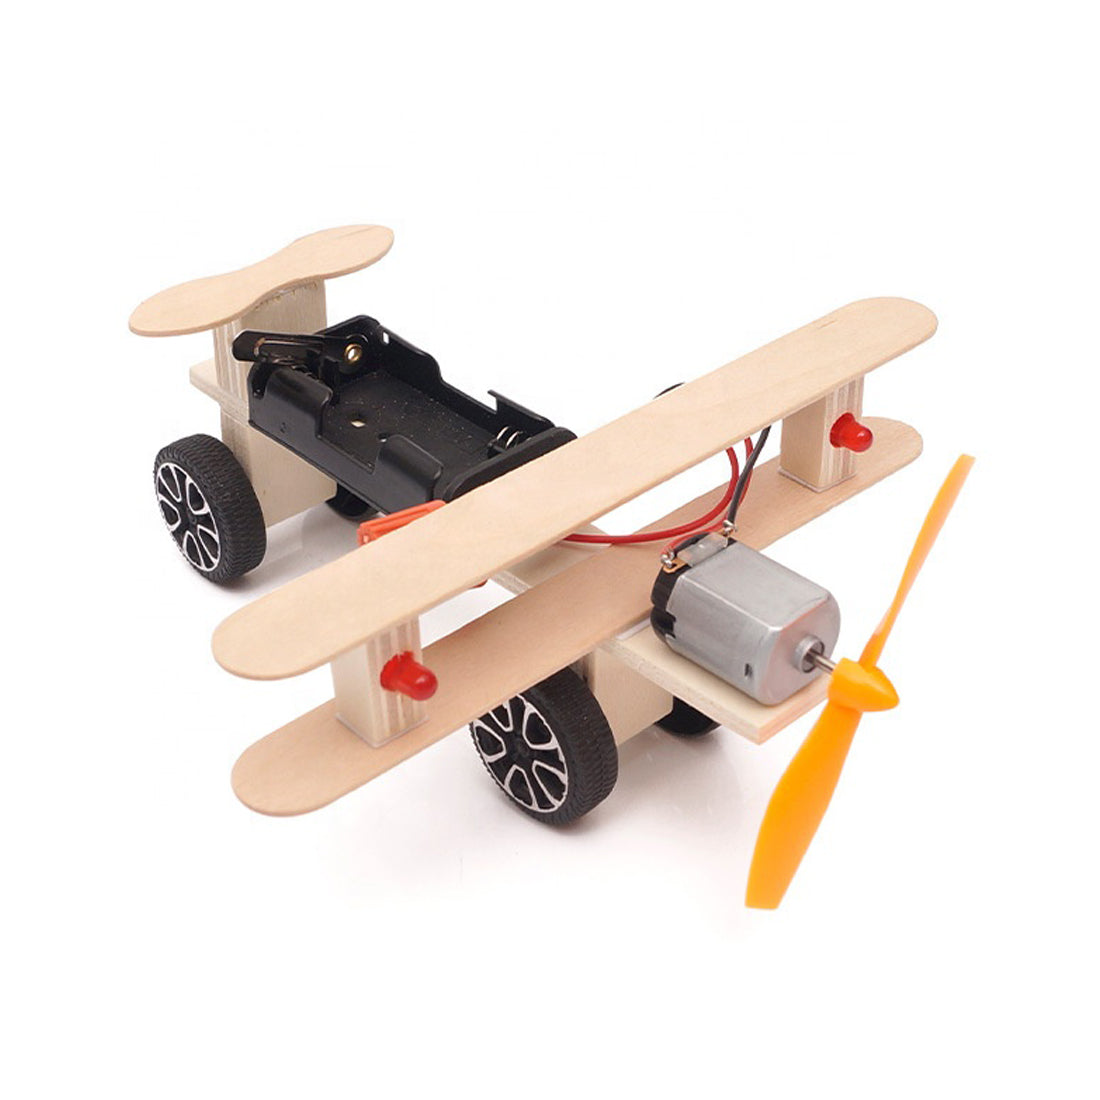 diy-stem-children-educational-science-assembly-hand-making-glide-aircraft-toy.jpg